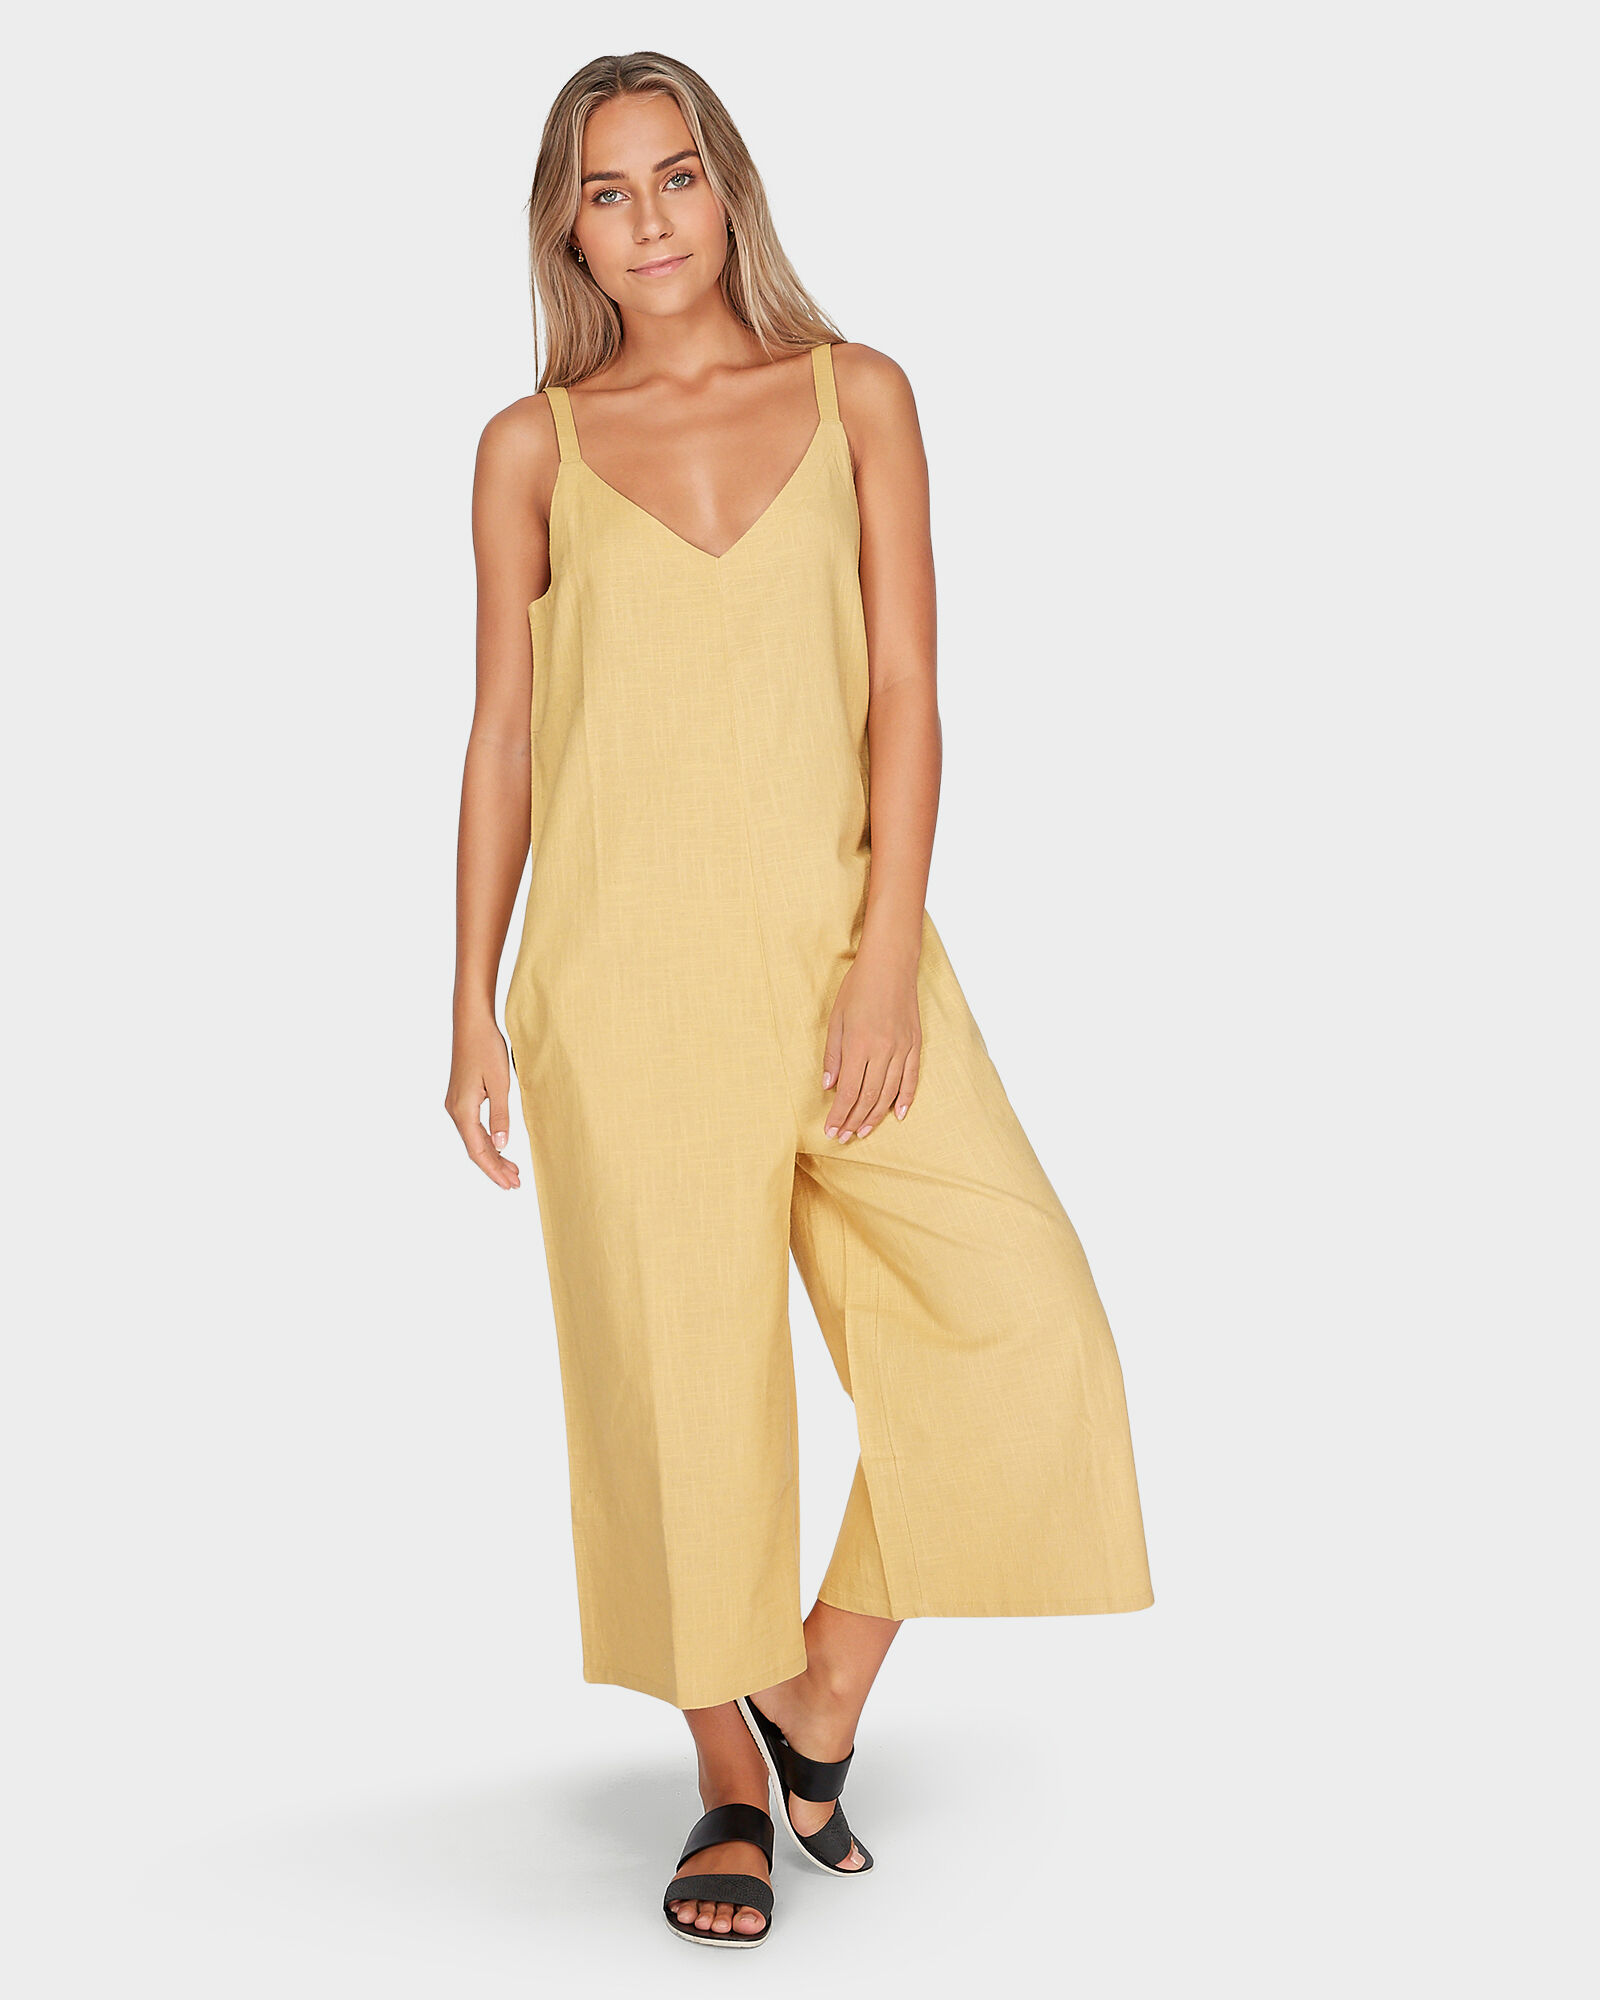 wind chaser jumpsuit